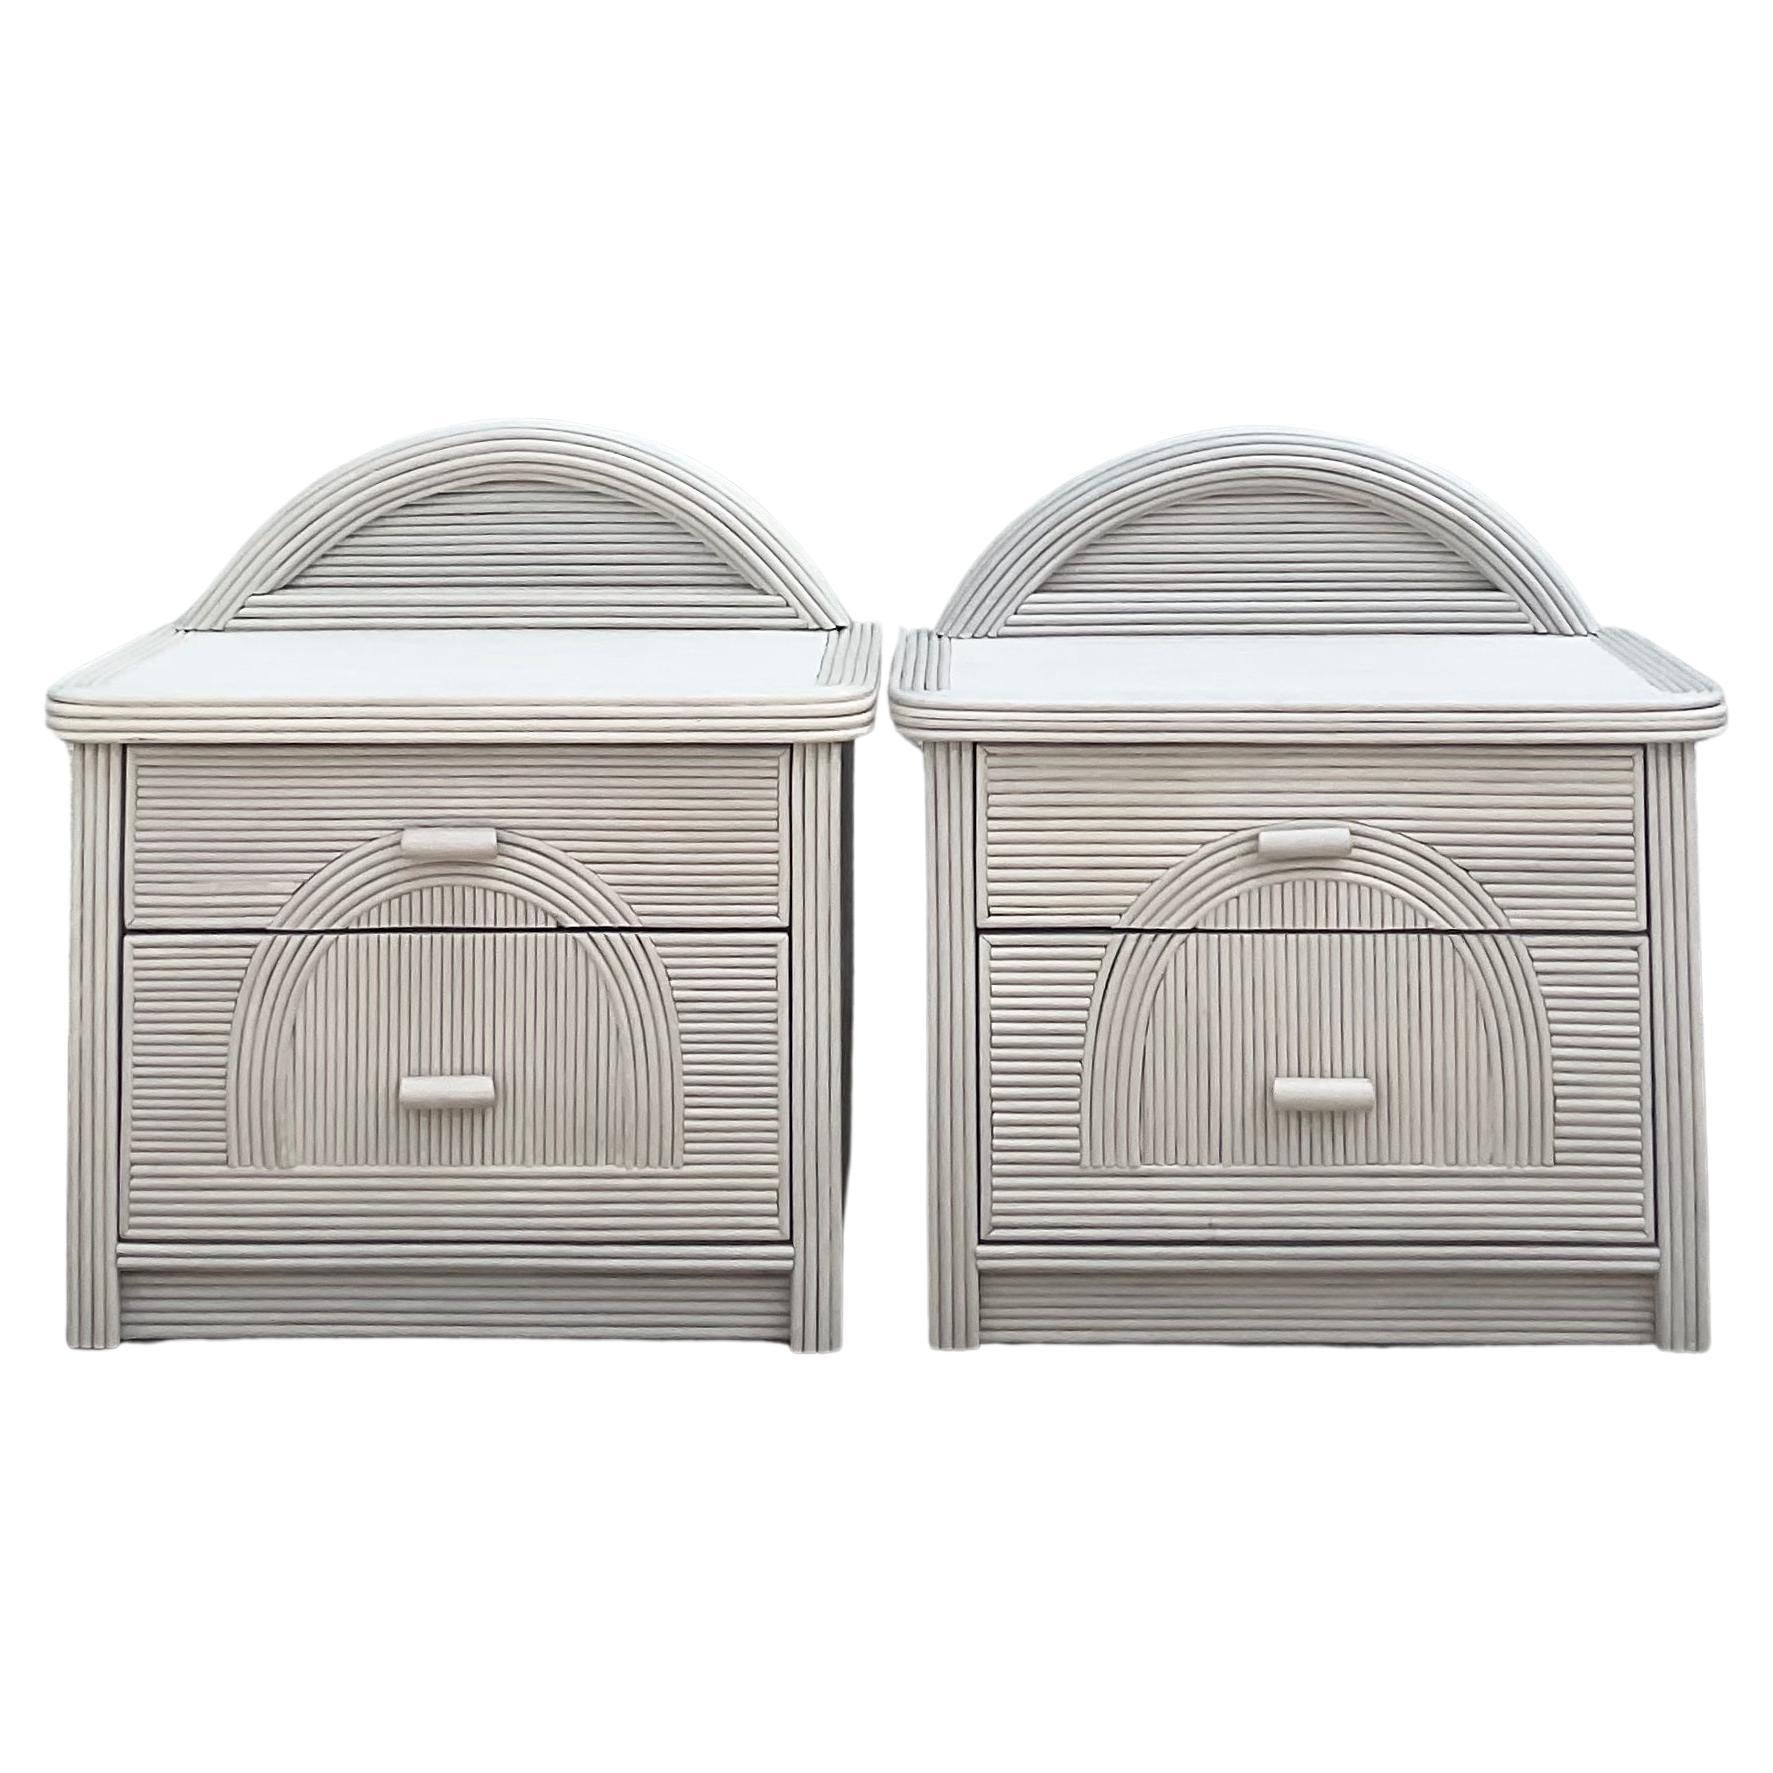 Vintage Organic Modern Arched Pencil Reed Nightstands, a Pair